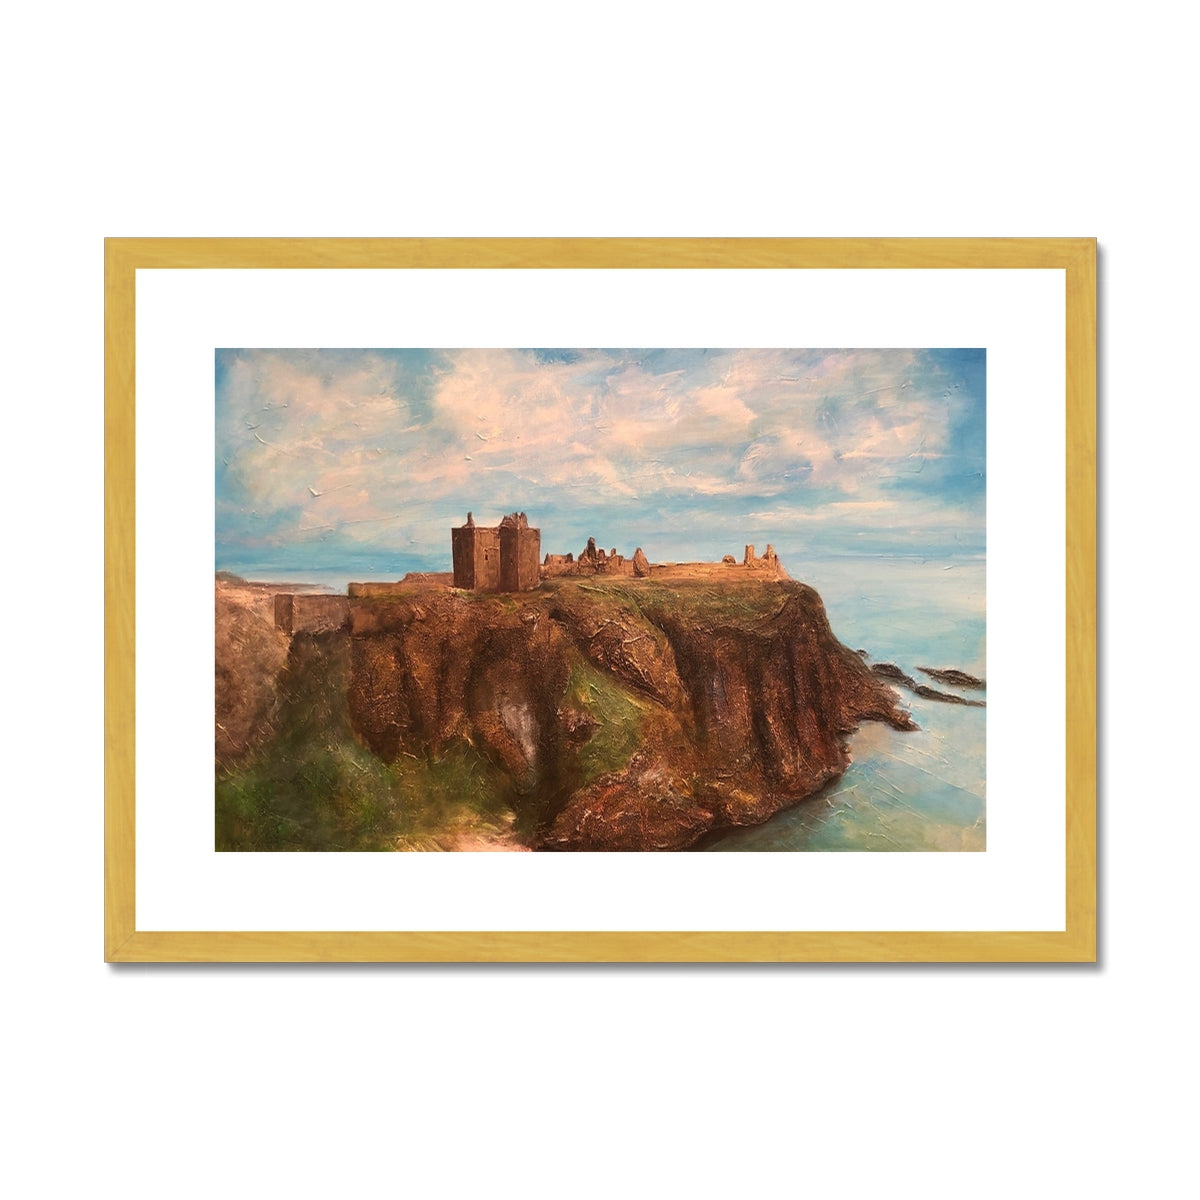 Dunnottar Castle Painting | Antique Framed & Mounted Prints From Scotland-Antique Framed & Mounted Prints-Historic & Iconic Scotland Art Gallery-A2 Landscape-Gold Frame-Paintings, Prints, Homeware, Art Gifts From Scotland By Scottish Artist Kevin Hunter